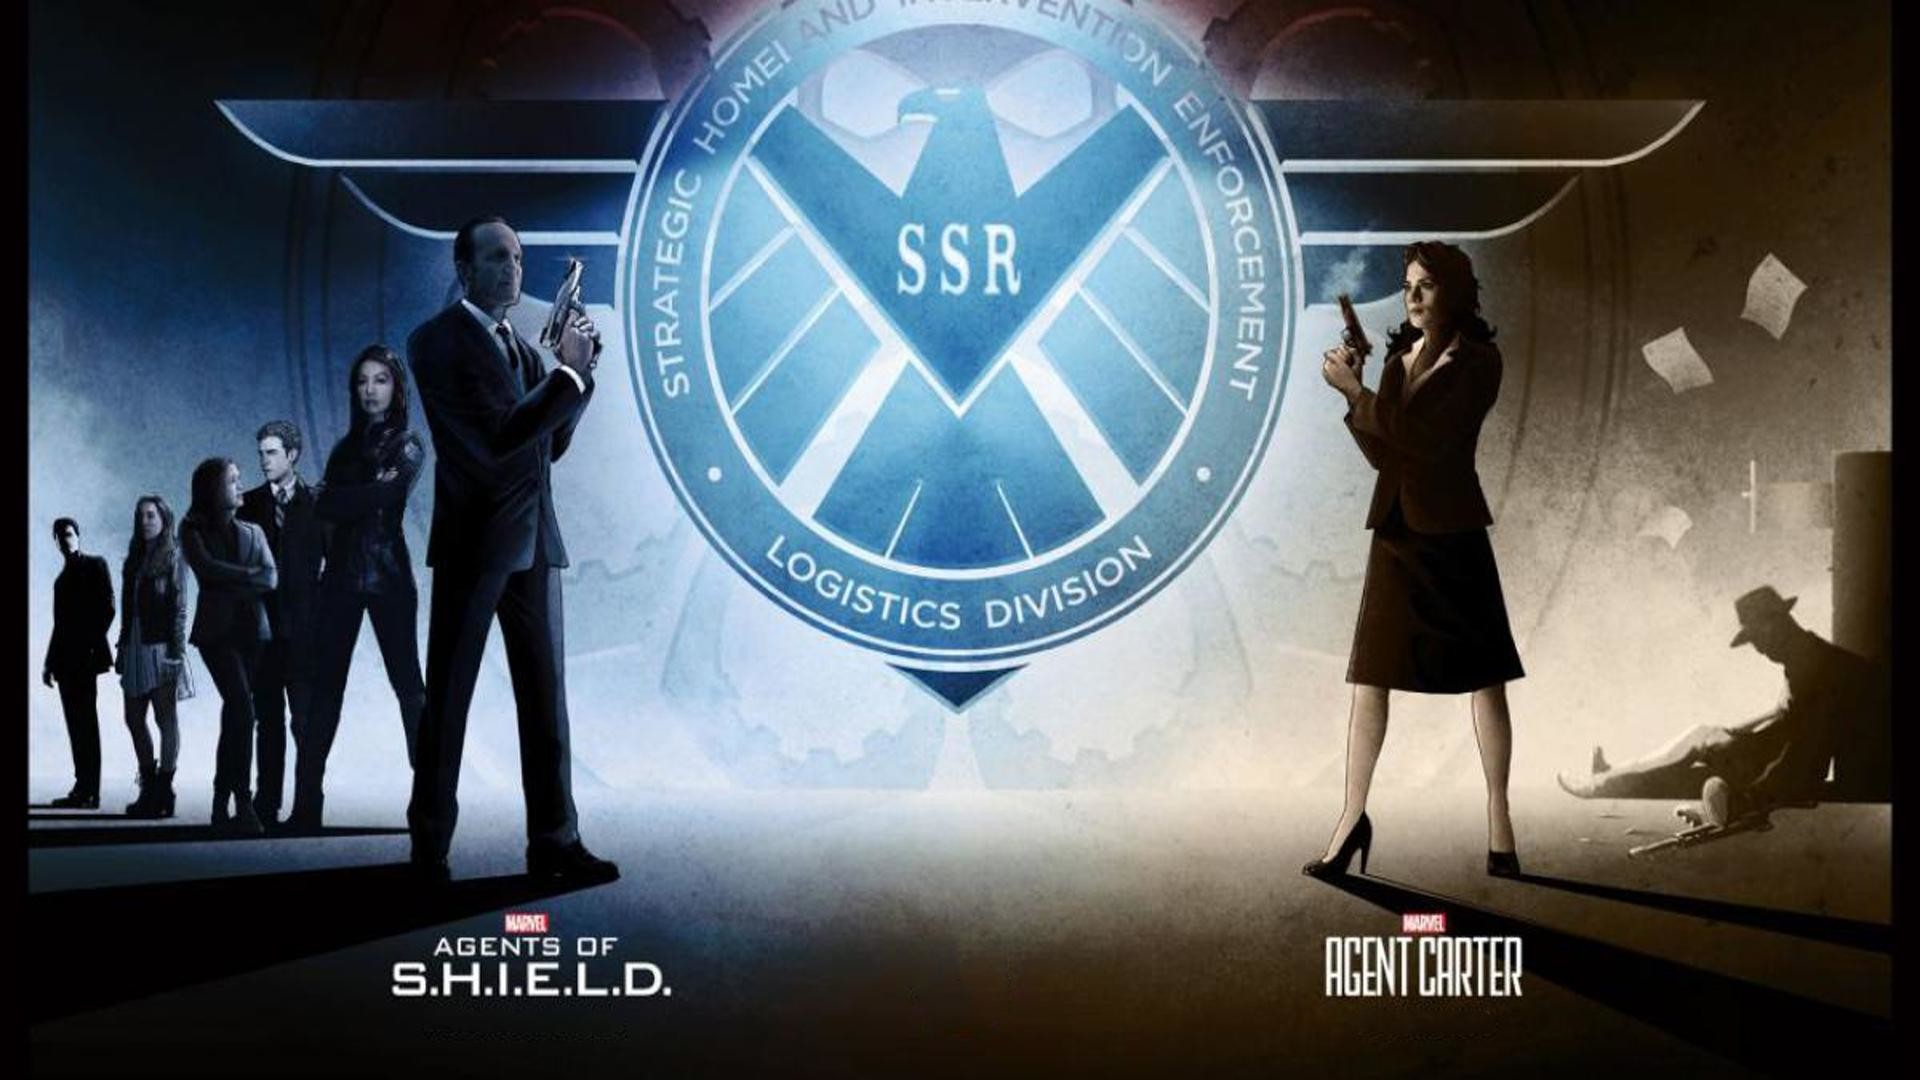 I found an image in one of the news pieces about Agents of S.H.I.E.L.D and Agent Carter getting renewed and decided to make it a wallpaper